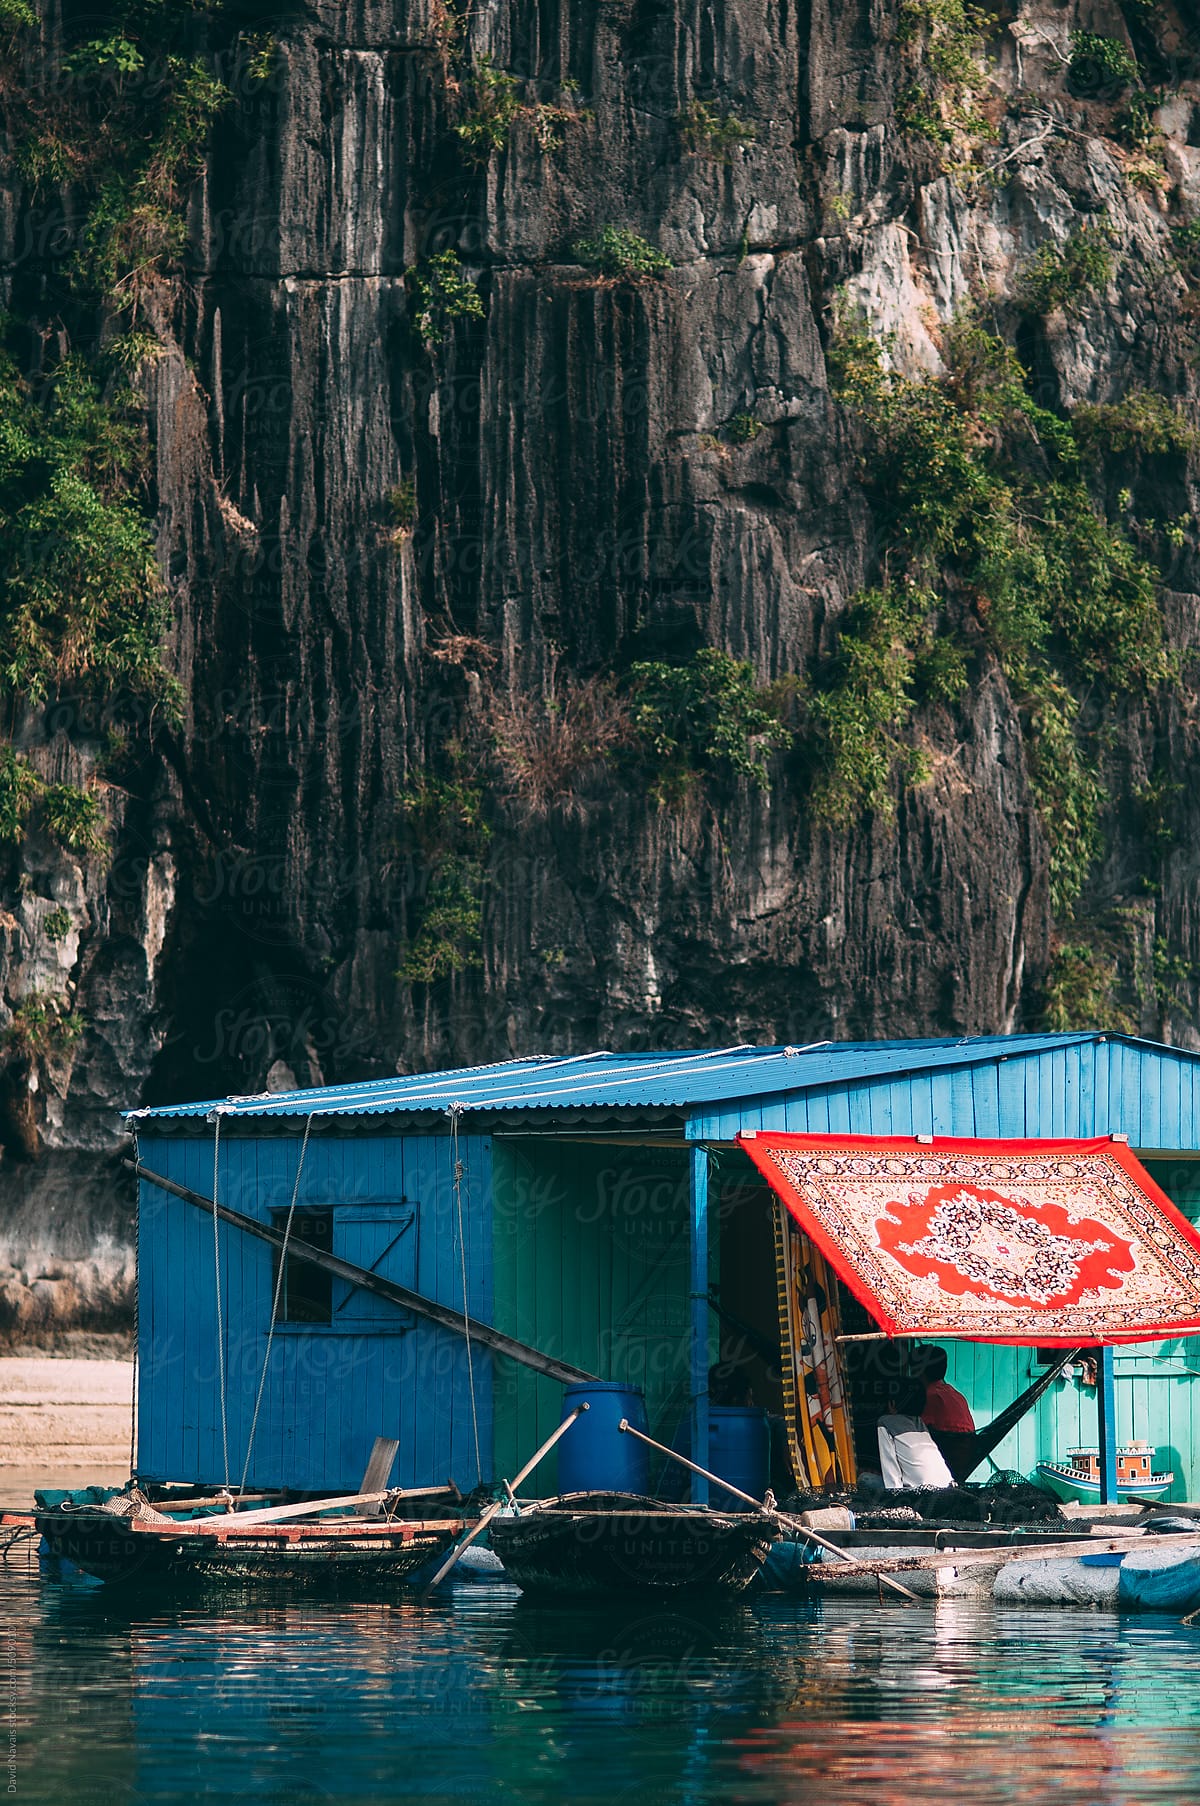 Floating house in Halong Bay